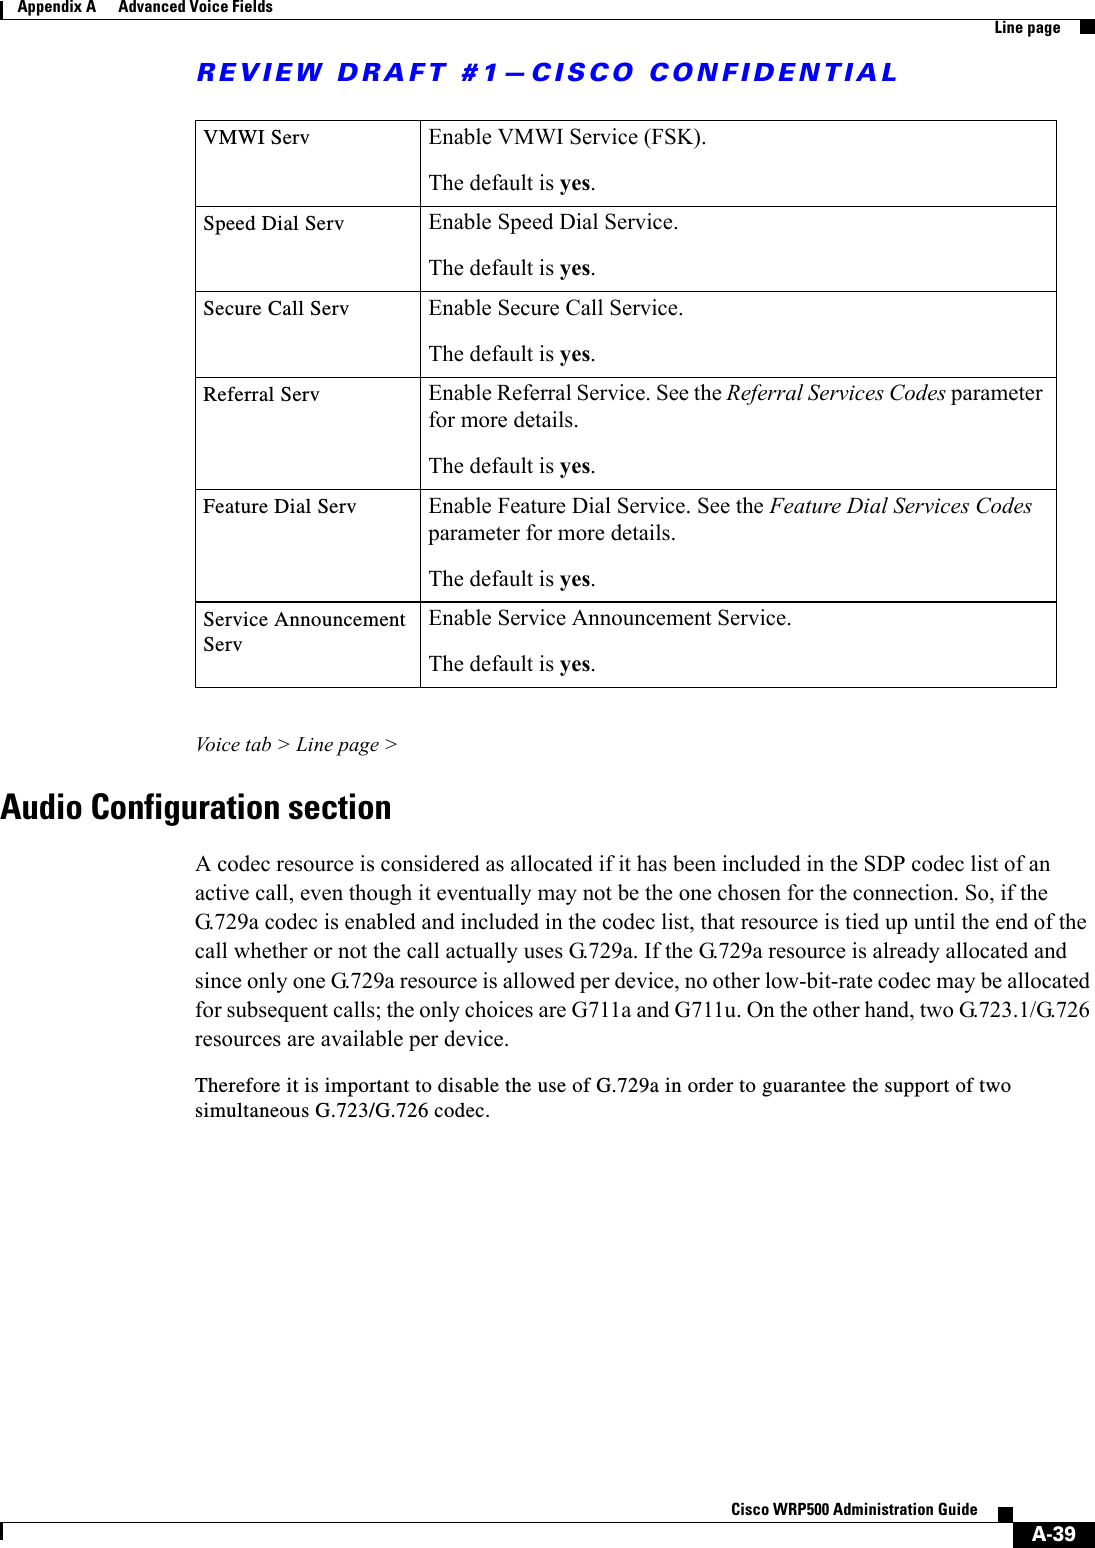 REVIEW DRAFT #1—CISCO CONFIDENTIALA-39Cisco WRP500 Administration Guide Appendix A      Advanced Voice Fields  Line pageVoice tab &gt; Line page &gt;Audio Configuration sectionA codec resource is considered as allocated if it has been included in the SDP codec list of an active call, even though it eventually may not be the one chosen for the connection. So, if the G.729a codec is enabled and included in the codec list, that resource is tied up until the end of the call whether or not the call actually uses G.729a. If the G.729a resource is already allocated and since only one G.729a resource is allowed per device, no other low-bit-rate codec may be allocated for subsequent calls; the only choices are G711a and G711u. On the other hand, two G.723.1/G.726 resources are available per device. Therefore it is important to disable the use of G.729a in order to guarantee the support of two simultaneous G.723/G.726 codec.VMWI Serv Enable VMWI Service (FSK).The default is yes.Speed Dial Serv Enable Speed Dial Service.The default is yes.Secure Call Serv Enable Secure Call Service.The default is yes.Referral Serv Enable Referral Service. See the Referral Services Codes parameter for more details.The default is yes.Feature Dial Serv Enable Feature Dial Service. See the Feature Dial Services Codes parameter for more details.The default is yes.Service Announcement ServEnable Service Announcement Service.The default is yes. 